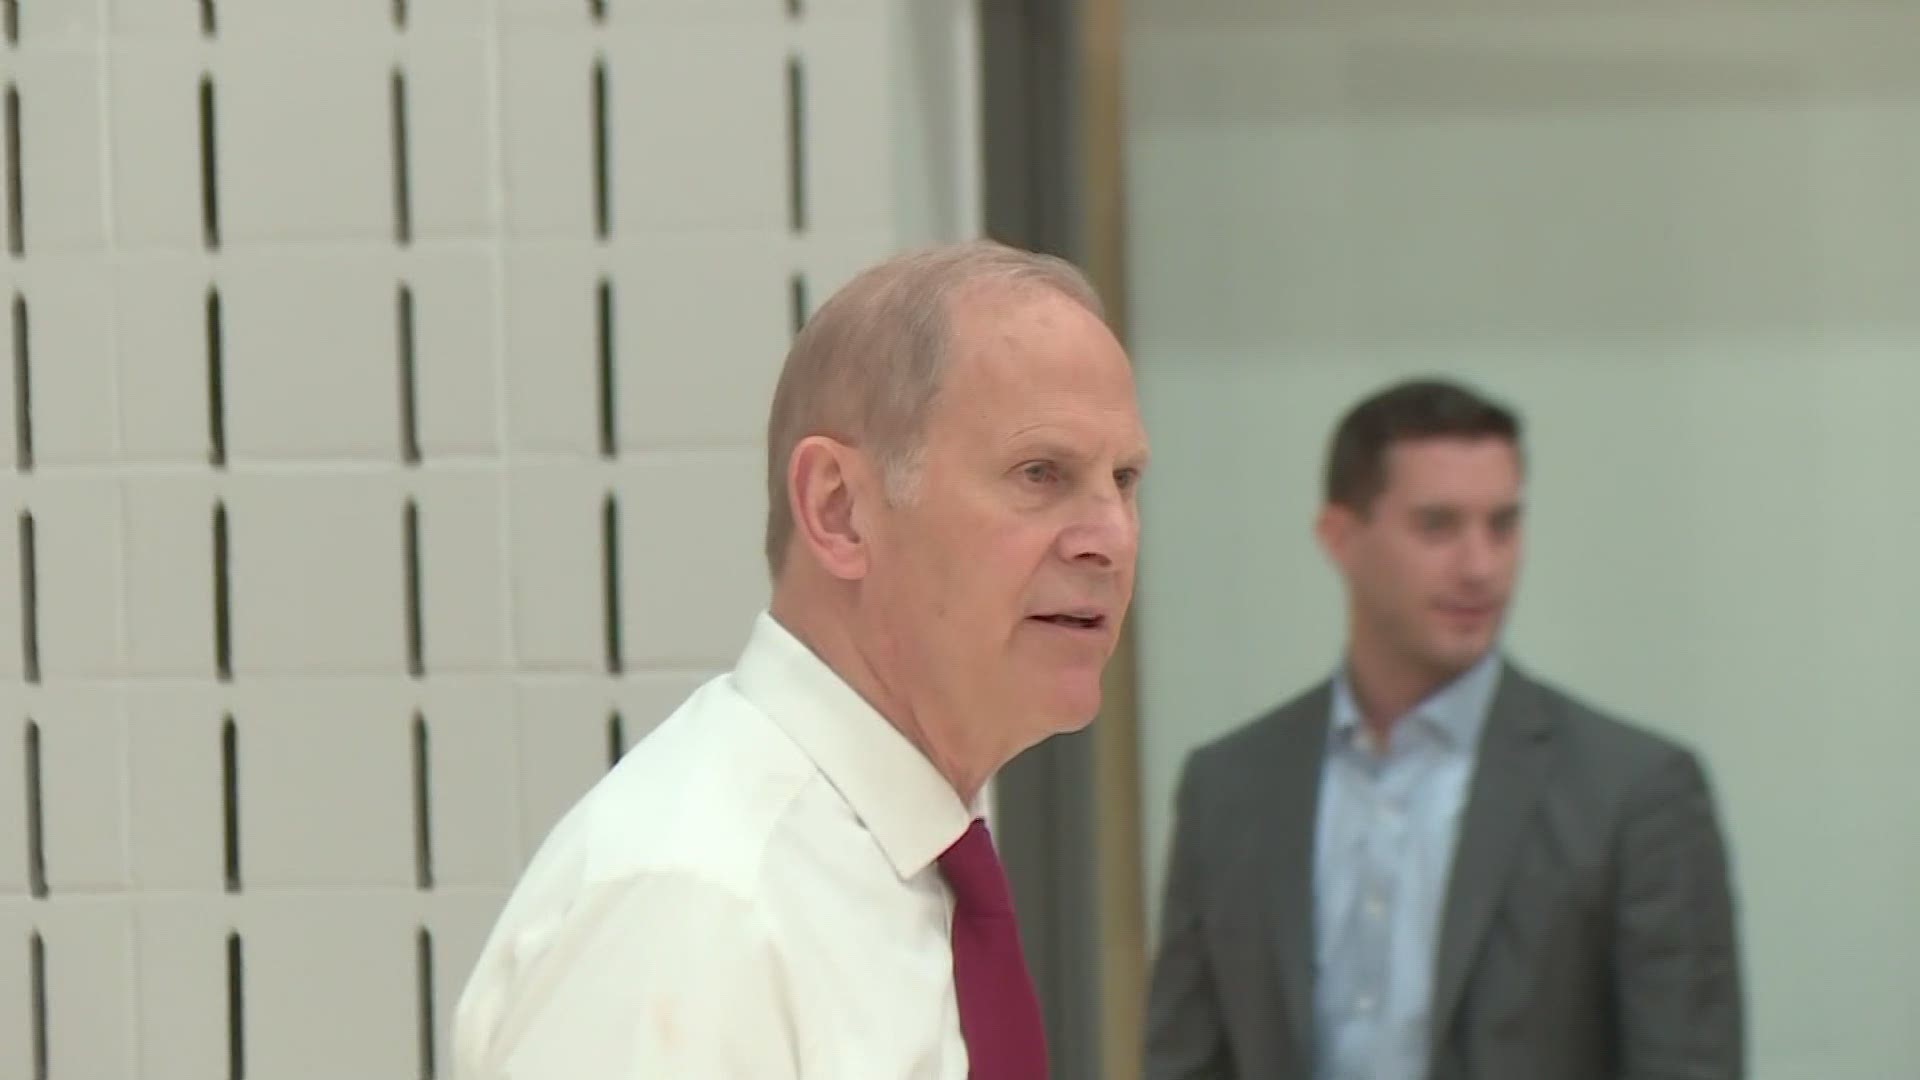 May 21, 2019: Ahead of the Cleveland Cavaliers officially announcing John Beilein as the team's new head coach, he was spotted on the practice court working with Larry Nance, Jr.